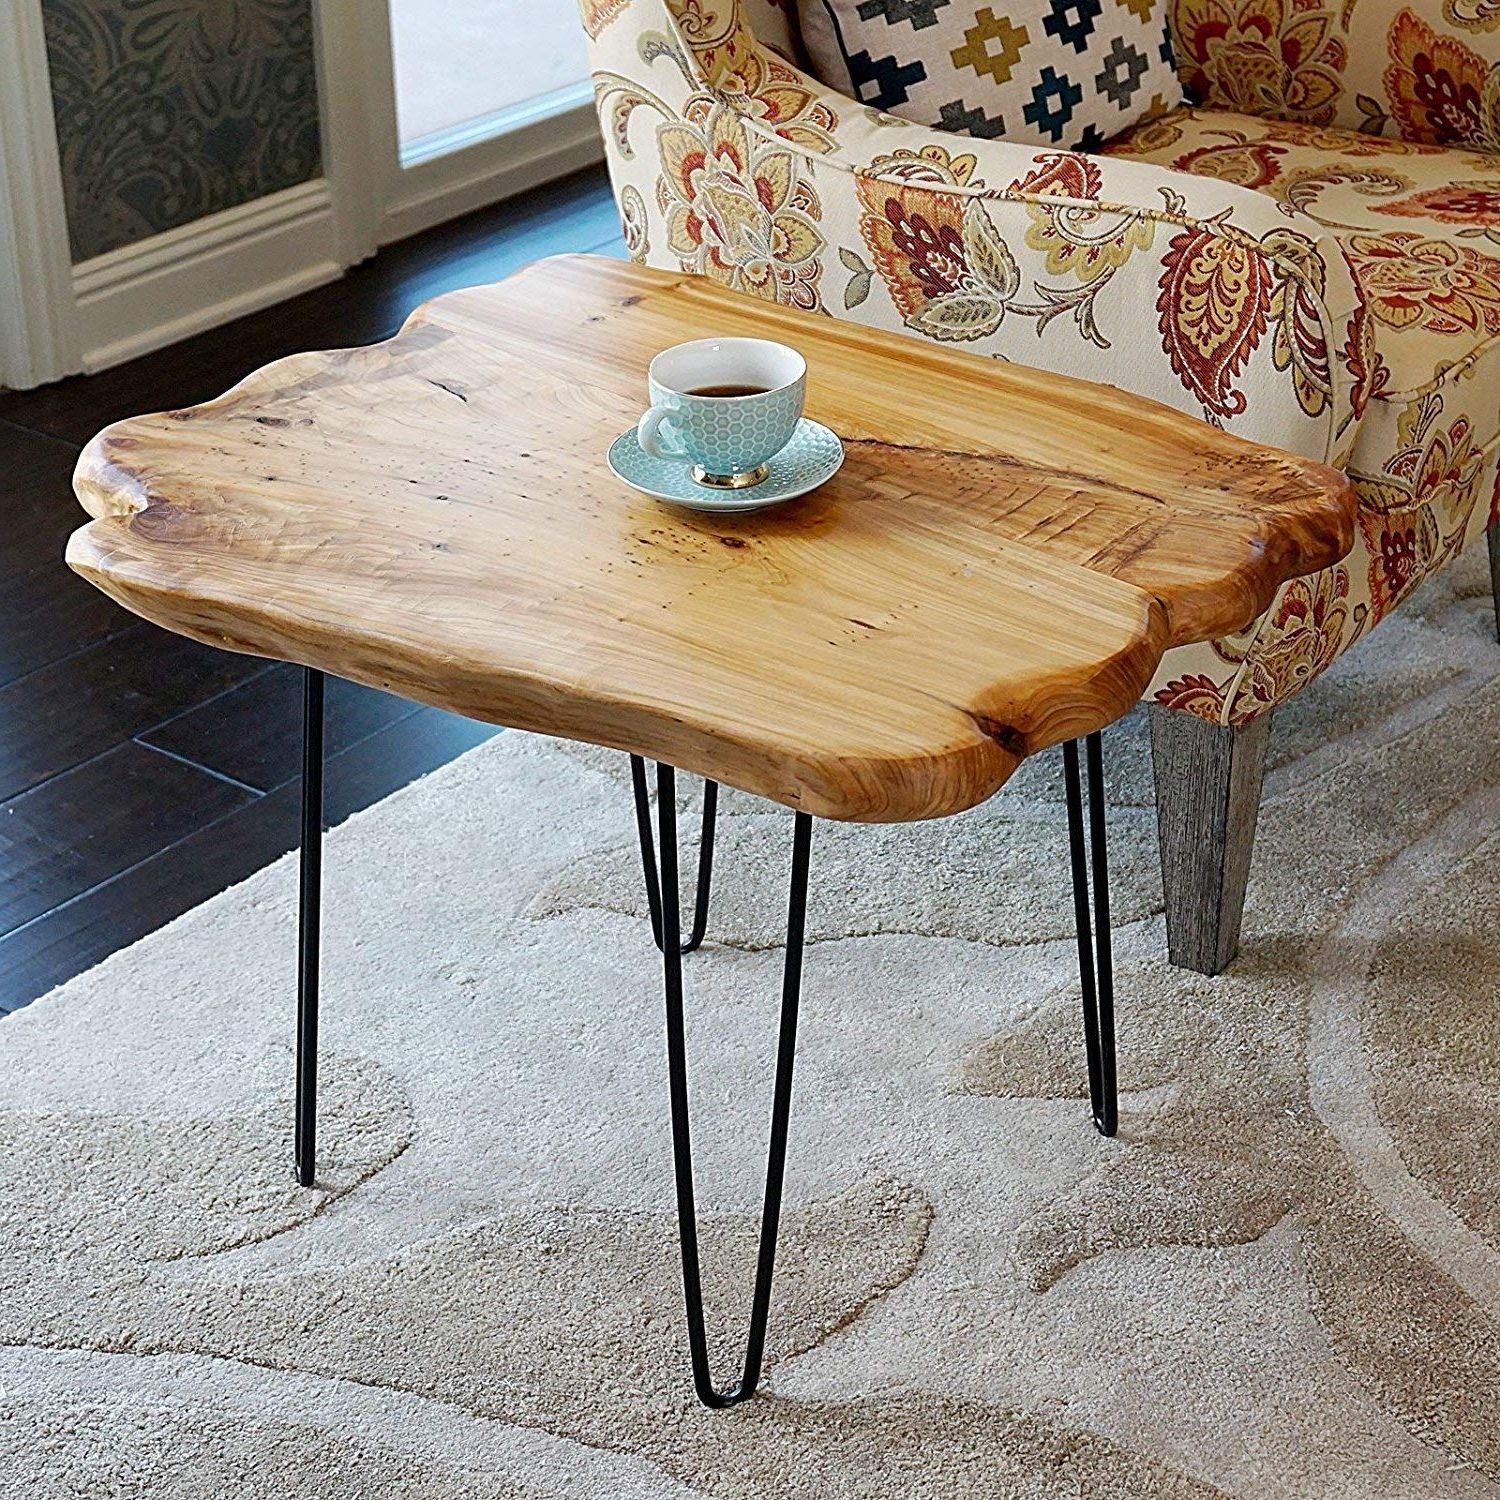 Recent Natural Wood Coffee Tables In Amazon: Welland Natural Edge Coffee Table Small, Hairpin Coffee (View 1 of 10)